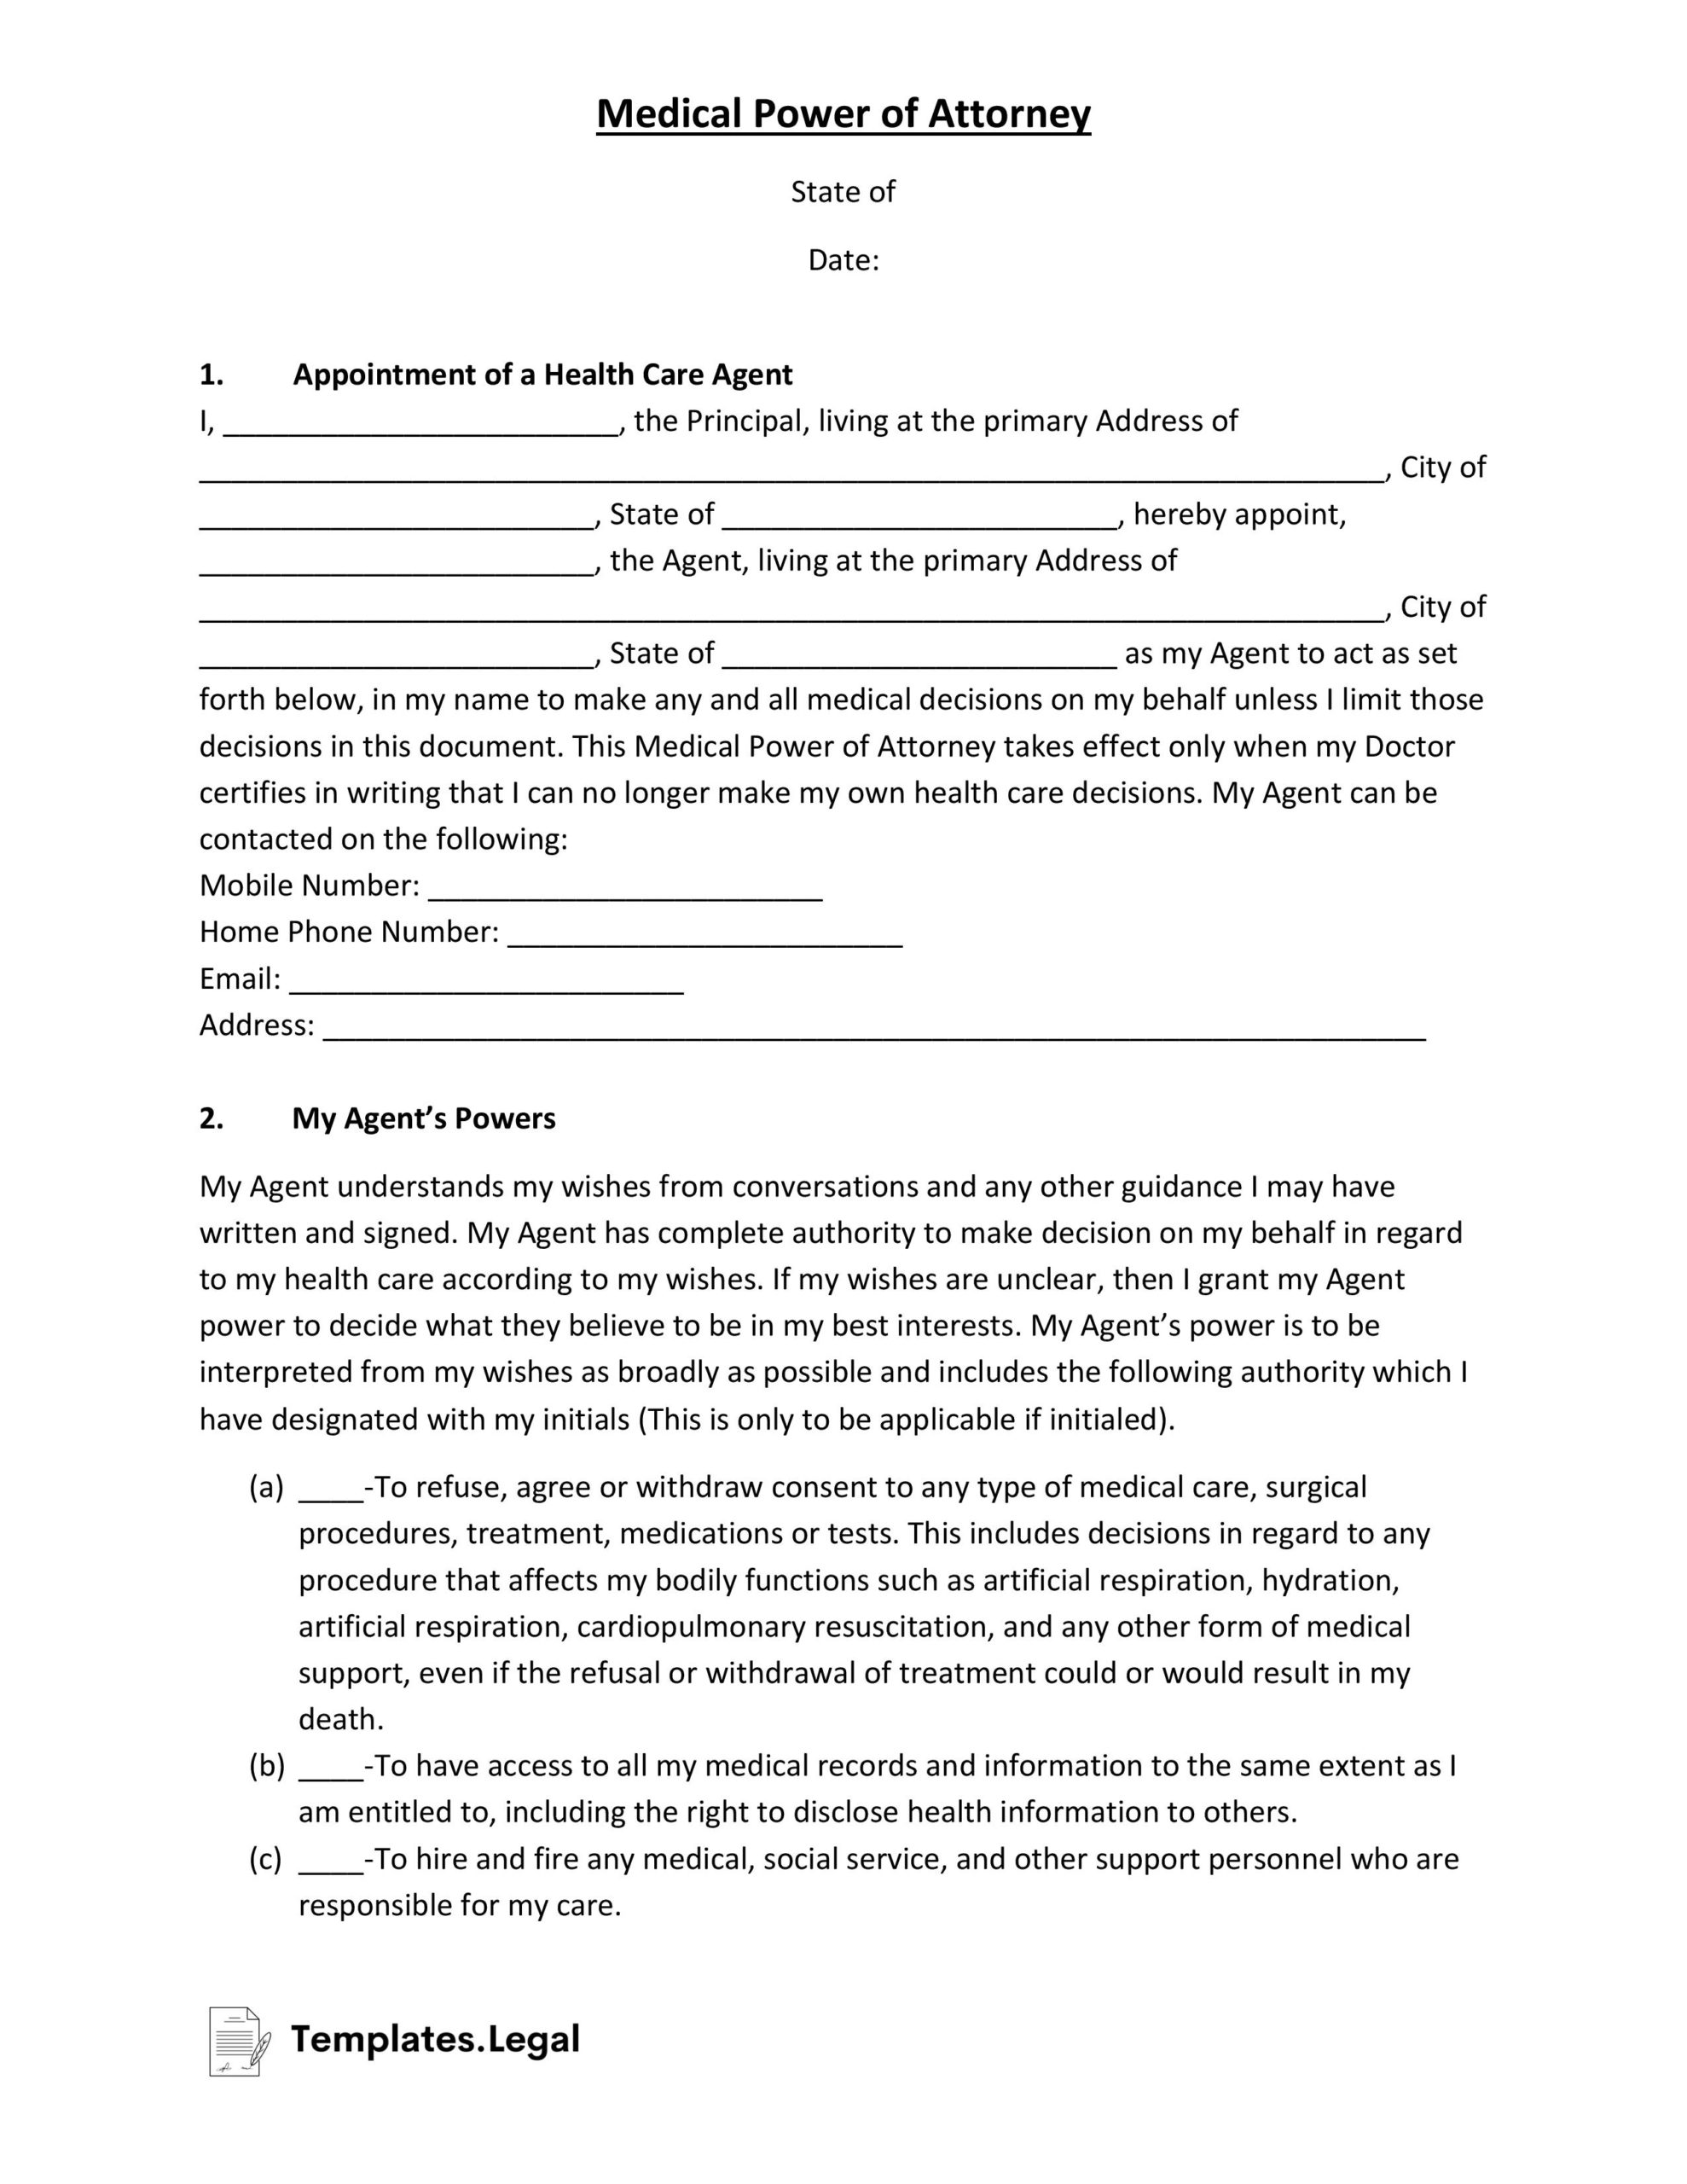 Standard Medical Power of Attorney- Templates.Legal